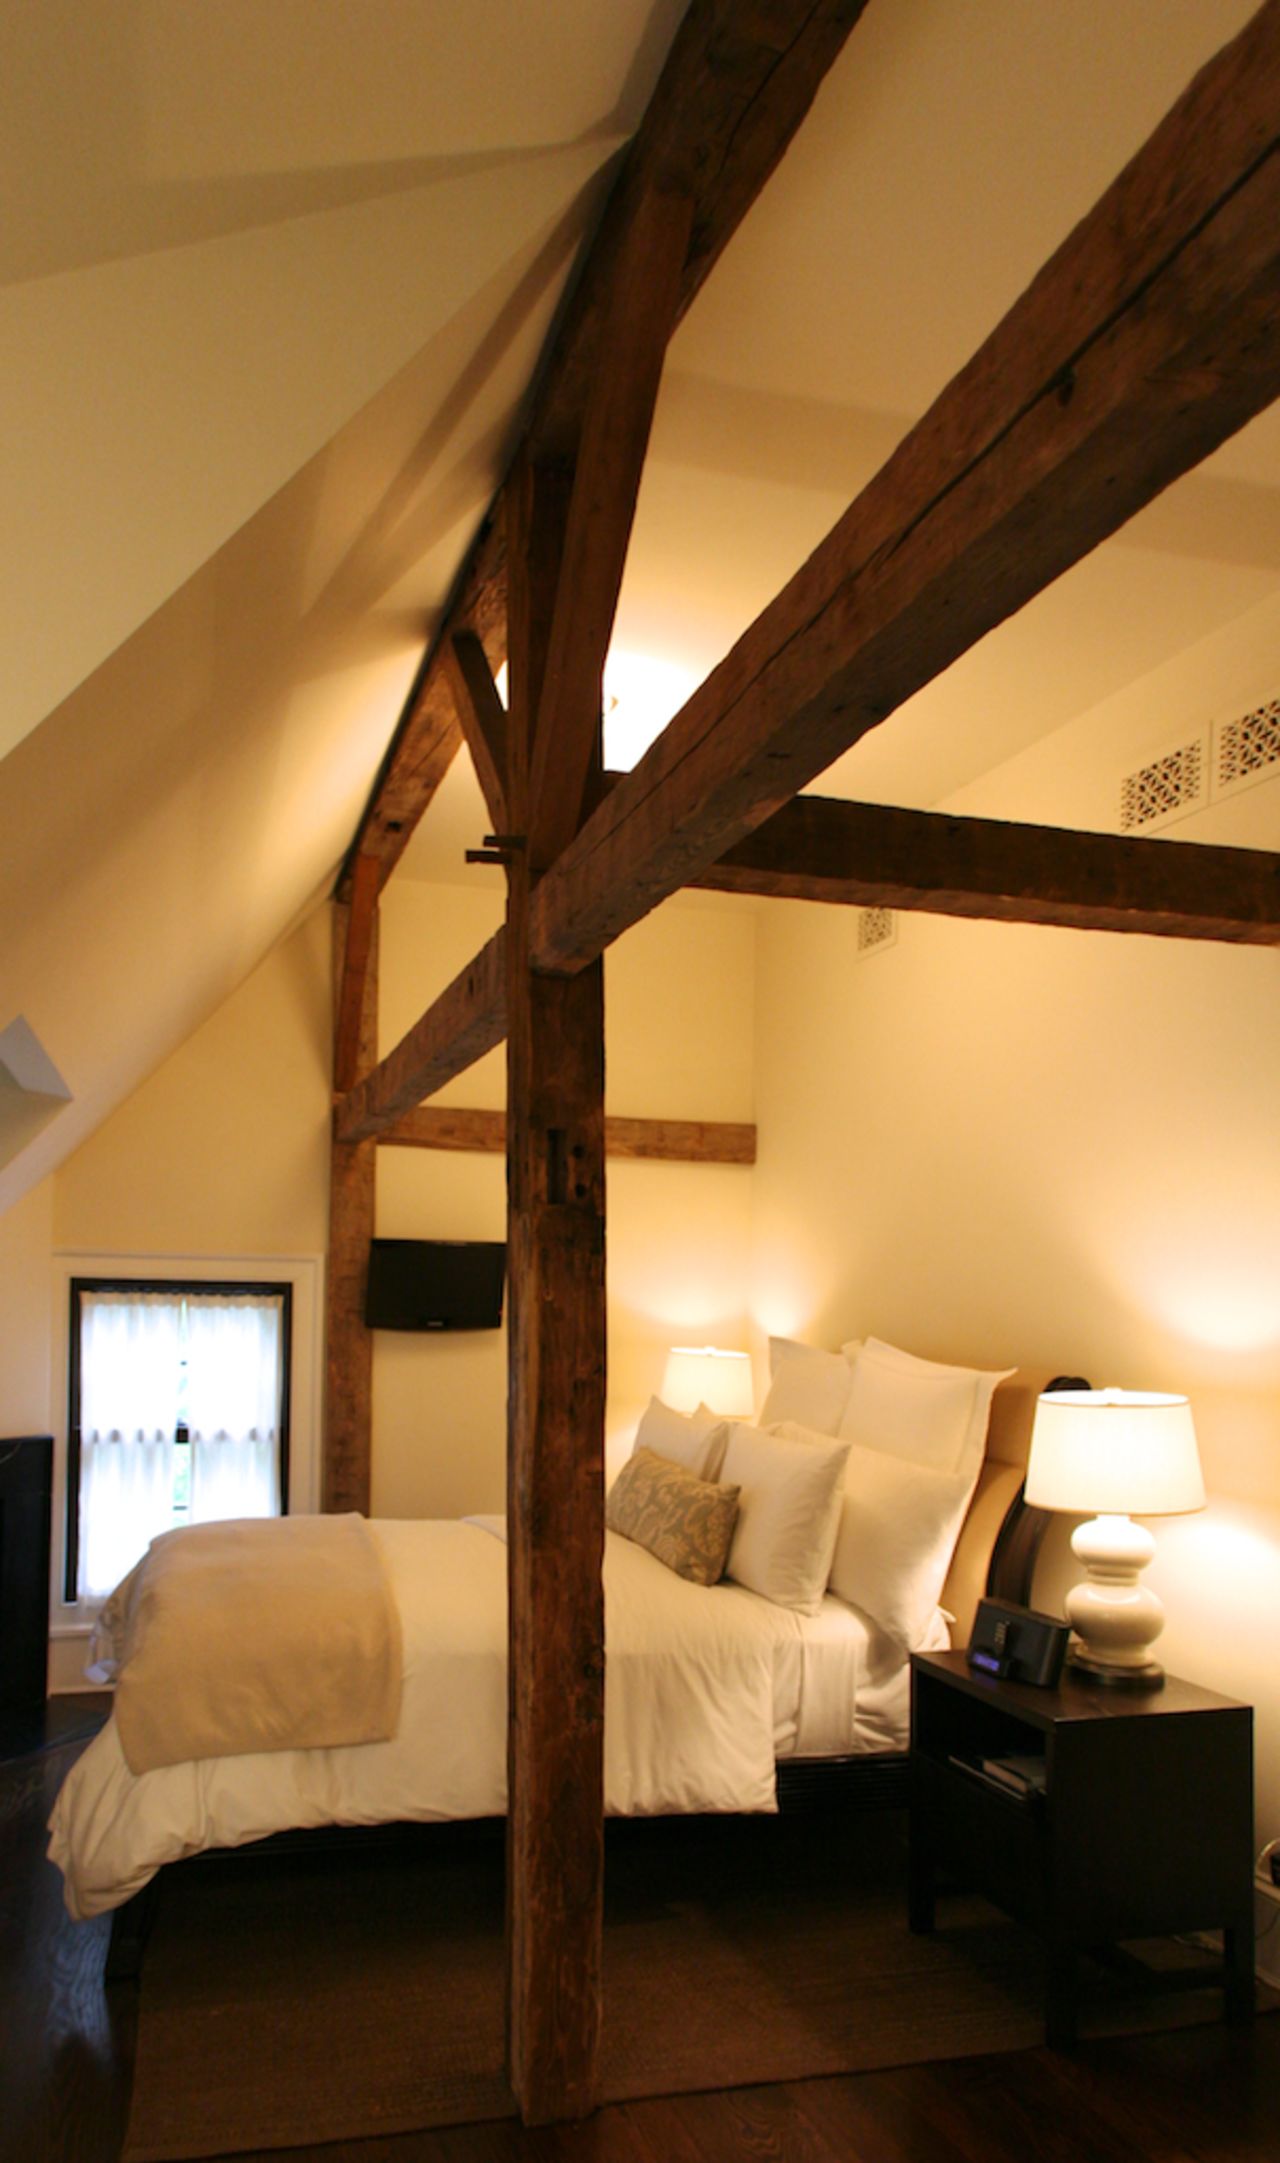 Wood beams from the building's original structure, dating back to the 18th century, have been retained.